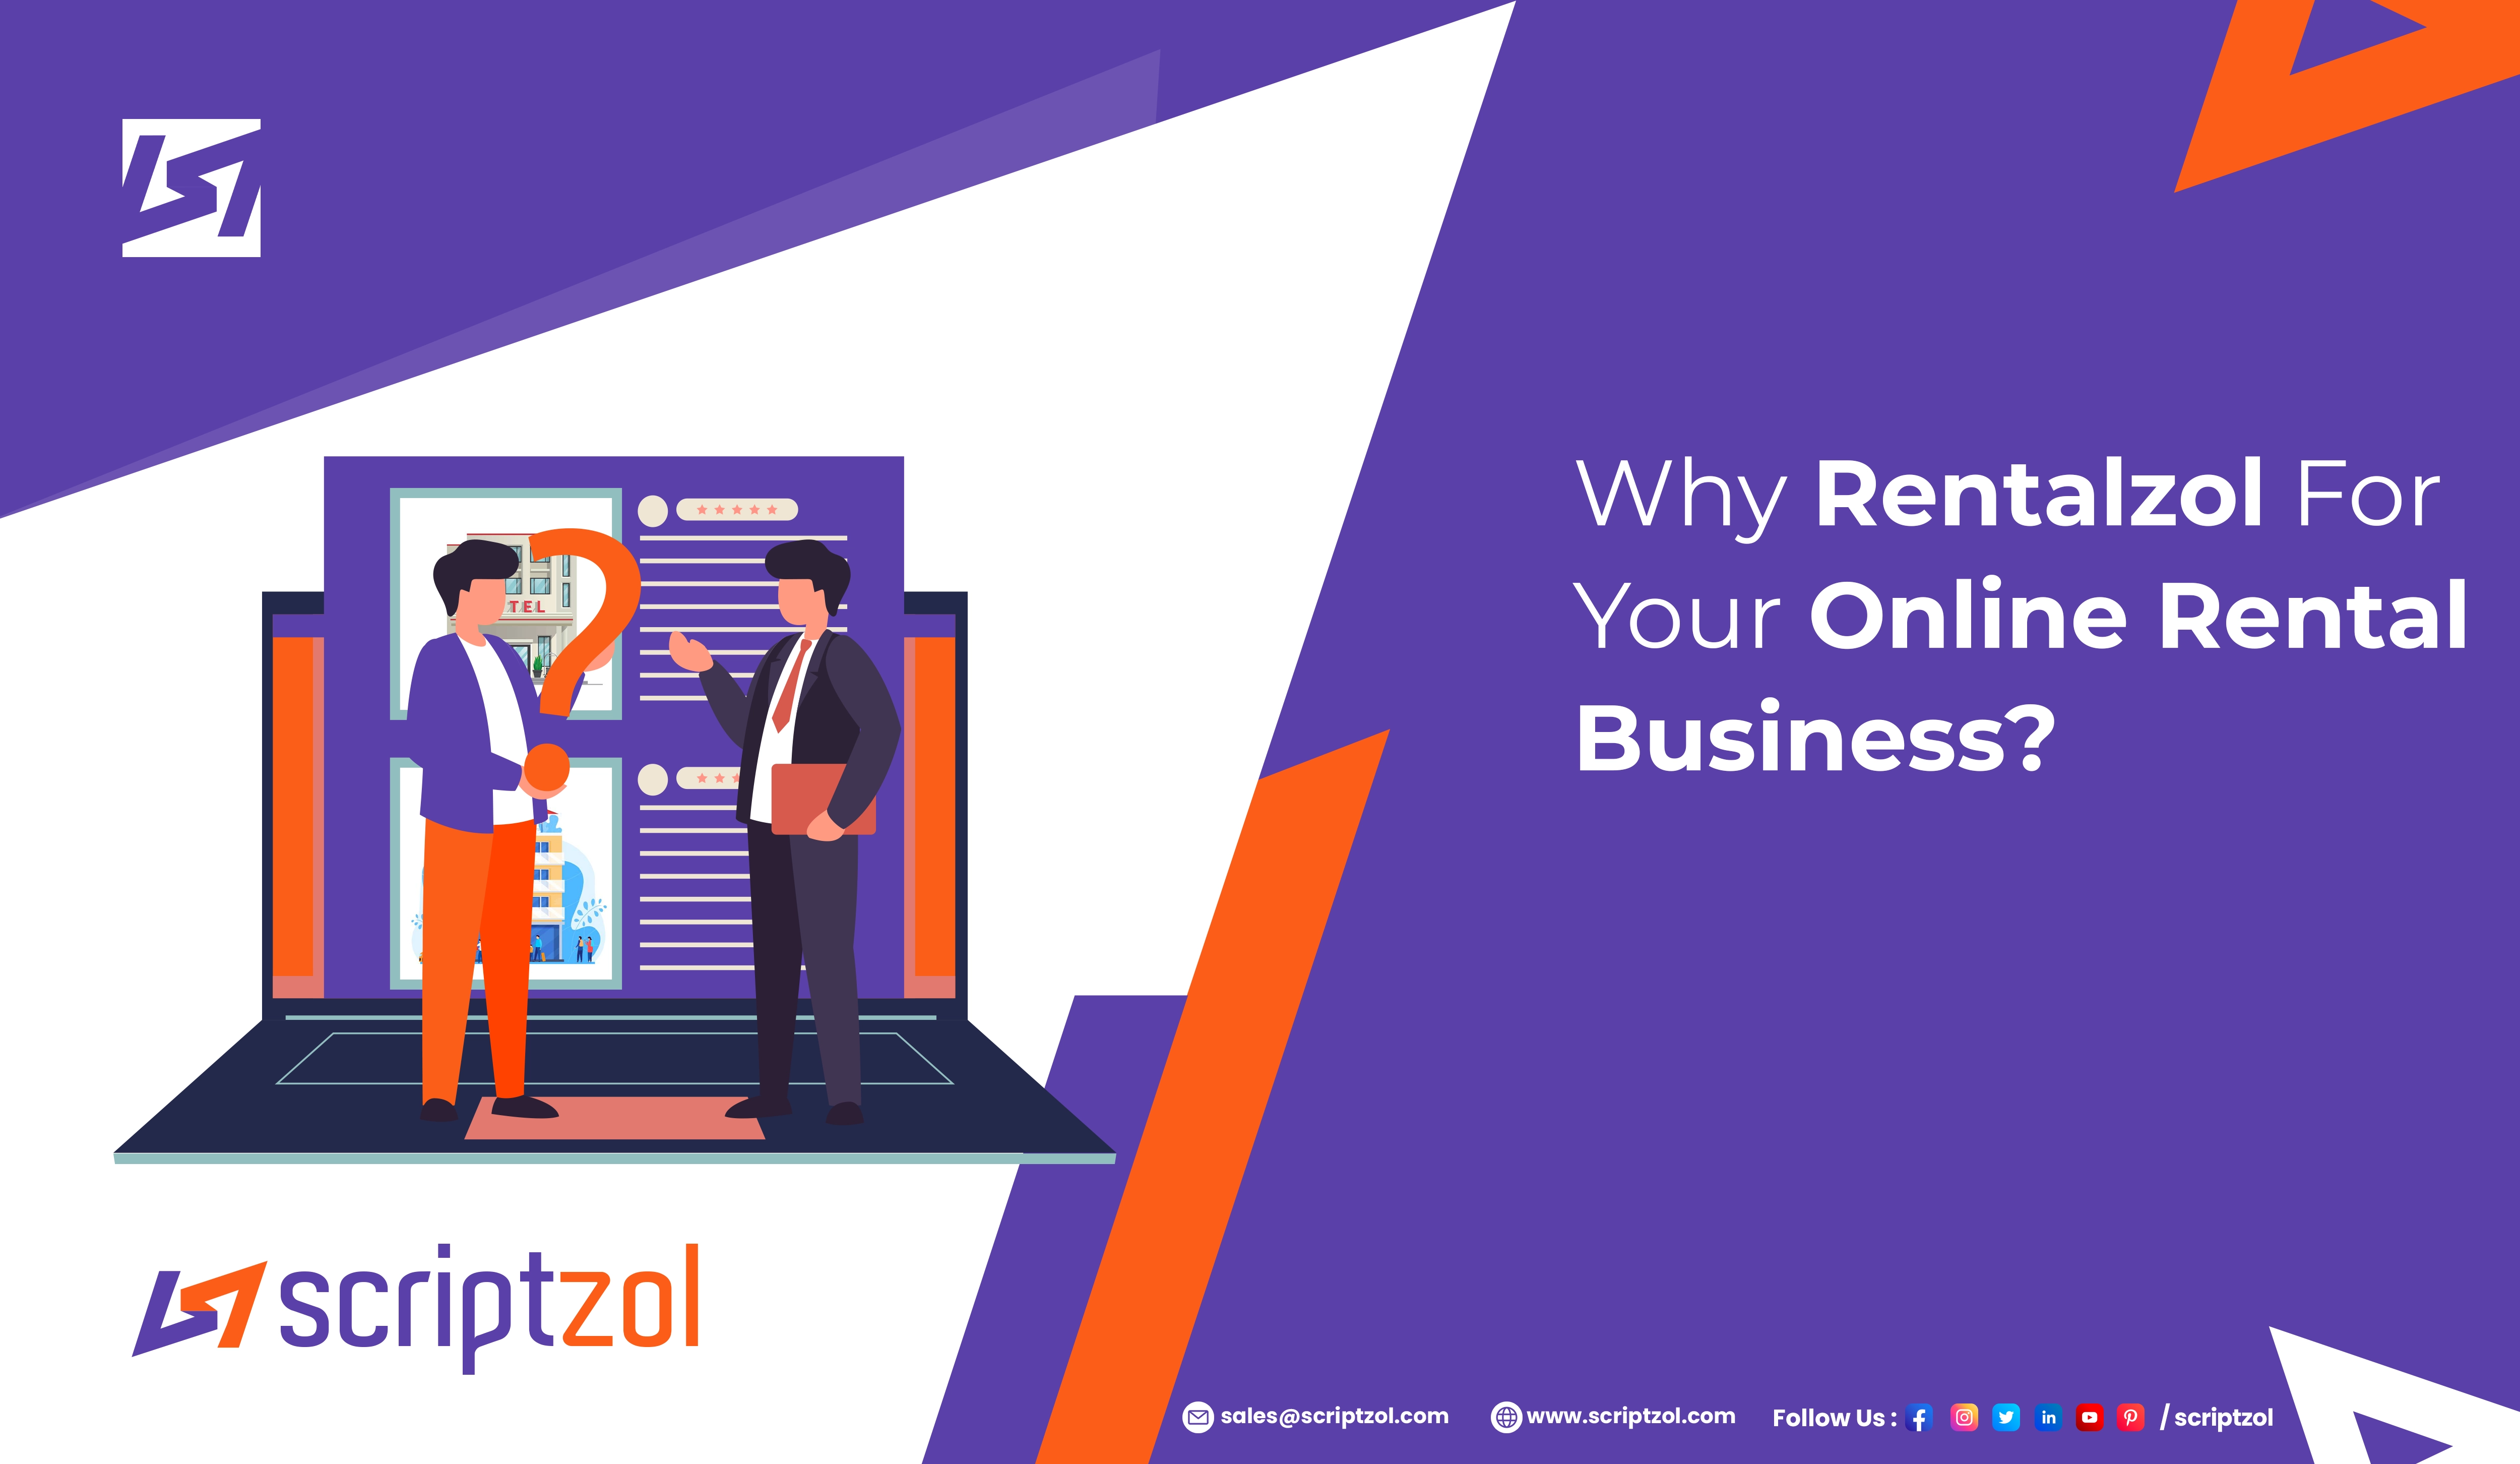 Why Rentalzol For Your Online Rental Business?